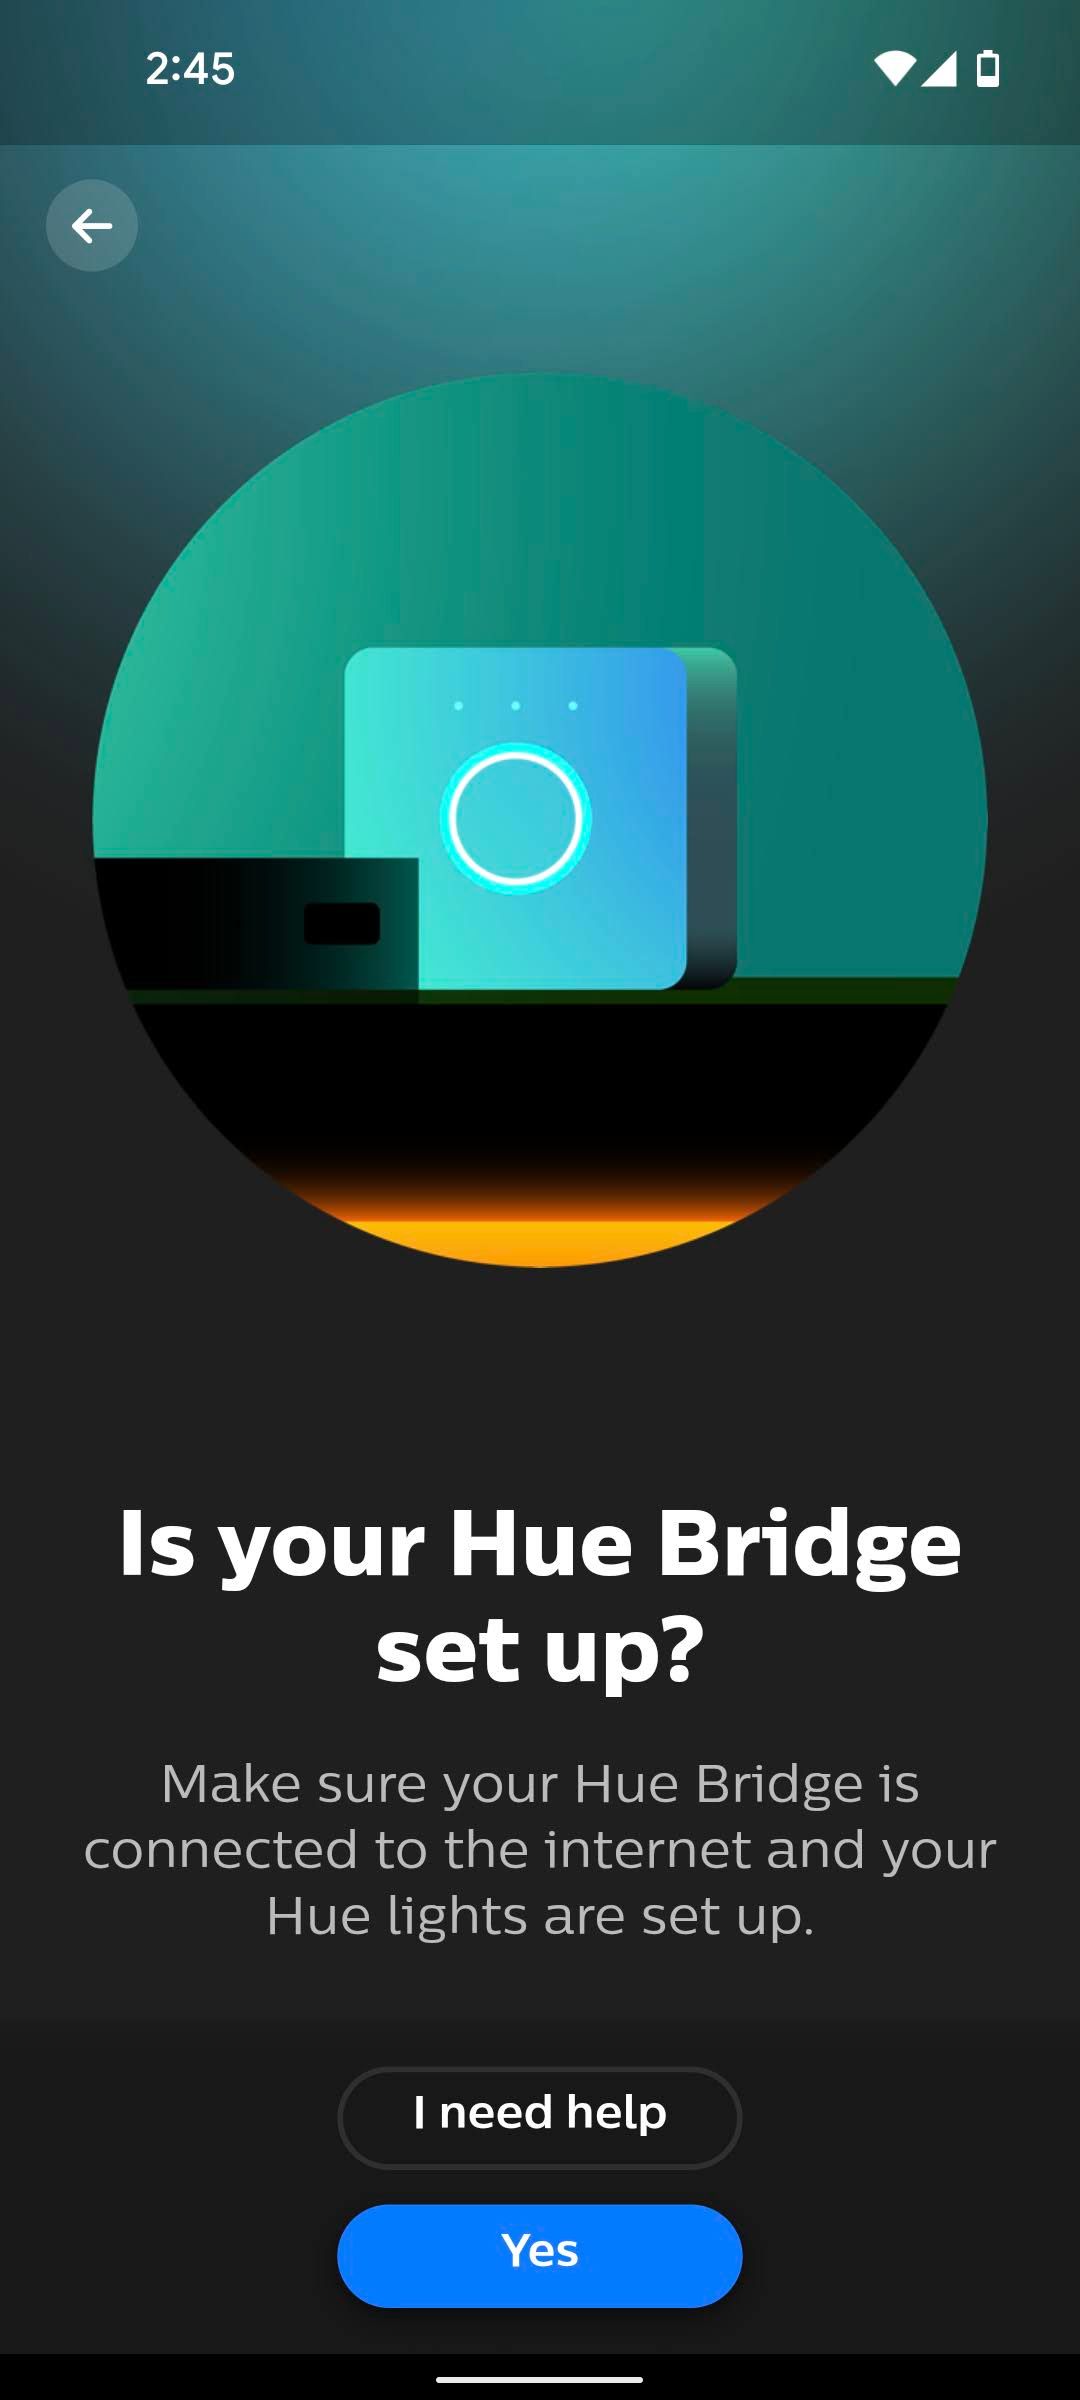 The Hue Bridge setup page in the Philips Hue Sync app